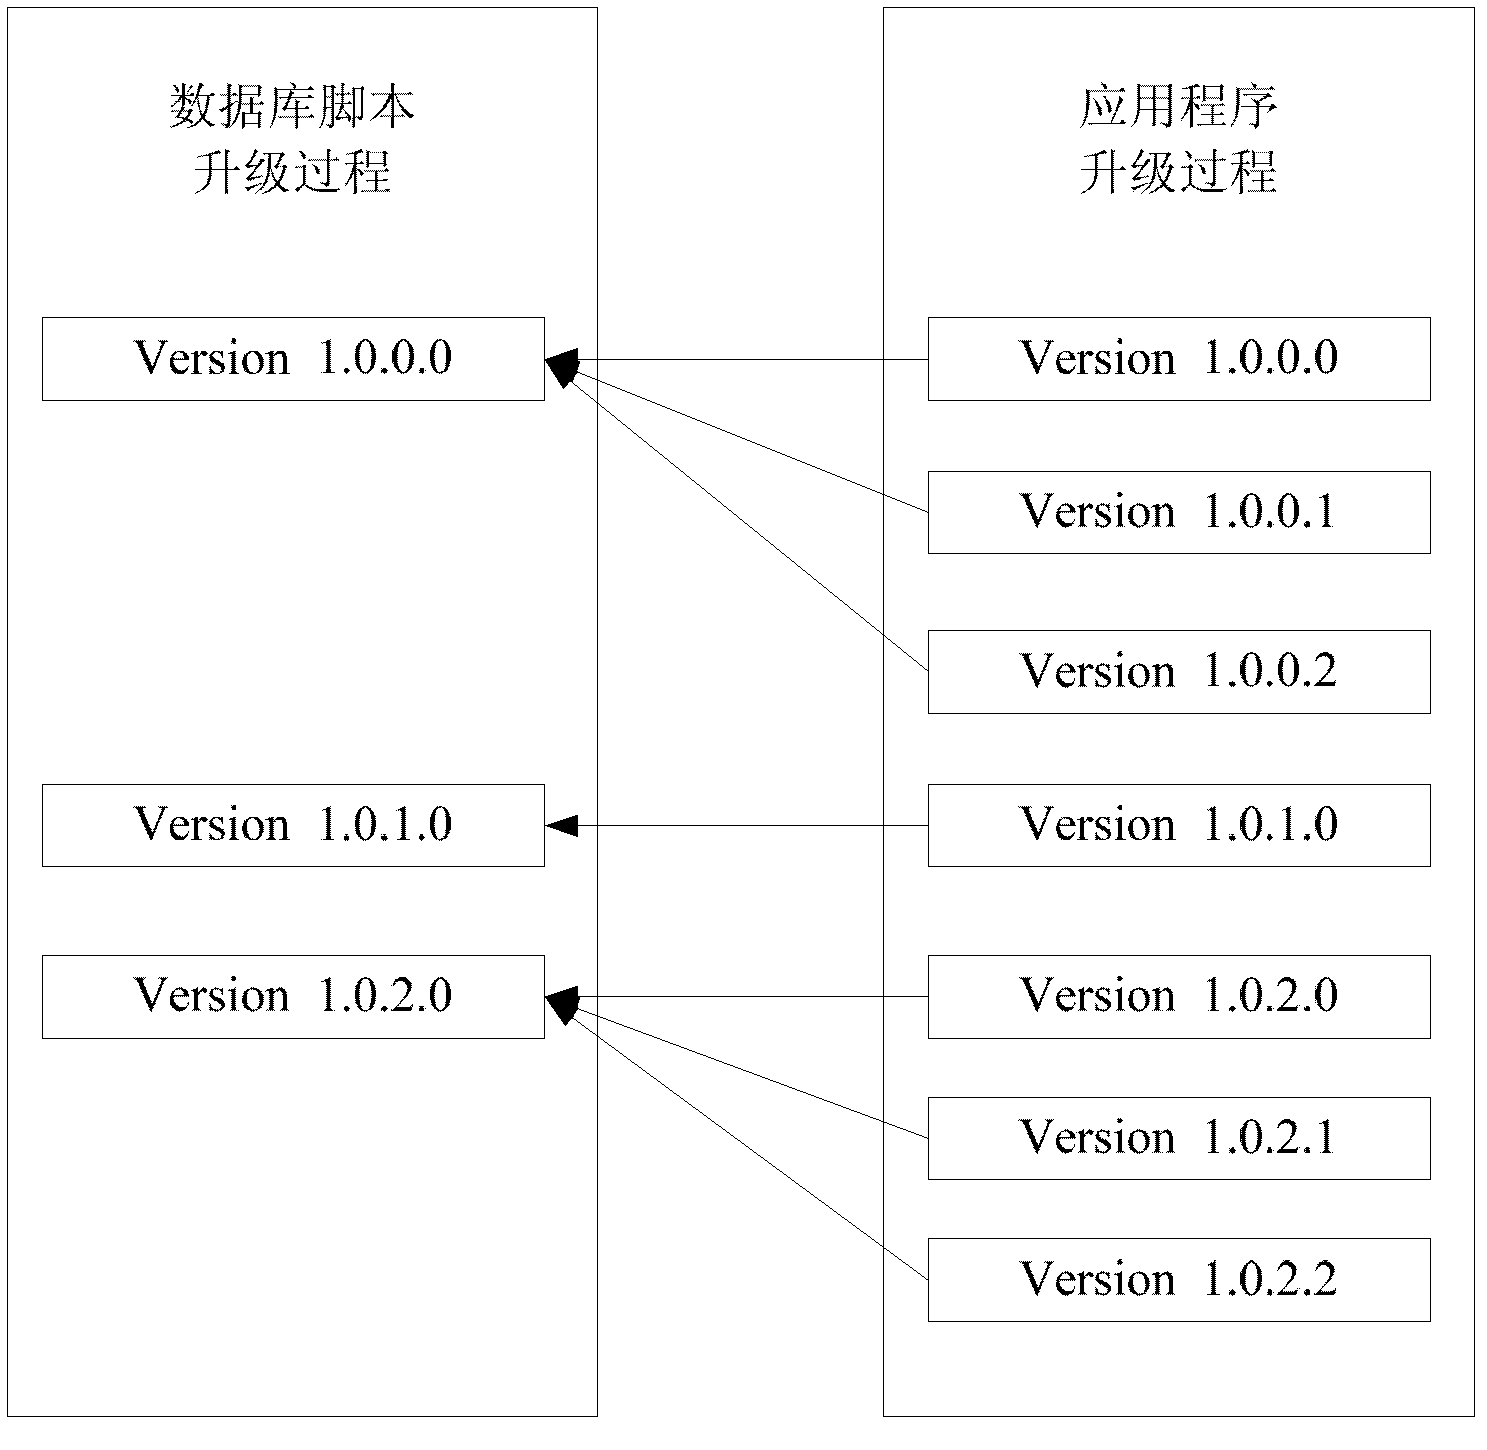 Methods for detecting compatibility of application program and relevant database script and performing upgrading maintenance on application program and relevant database script